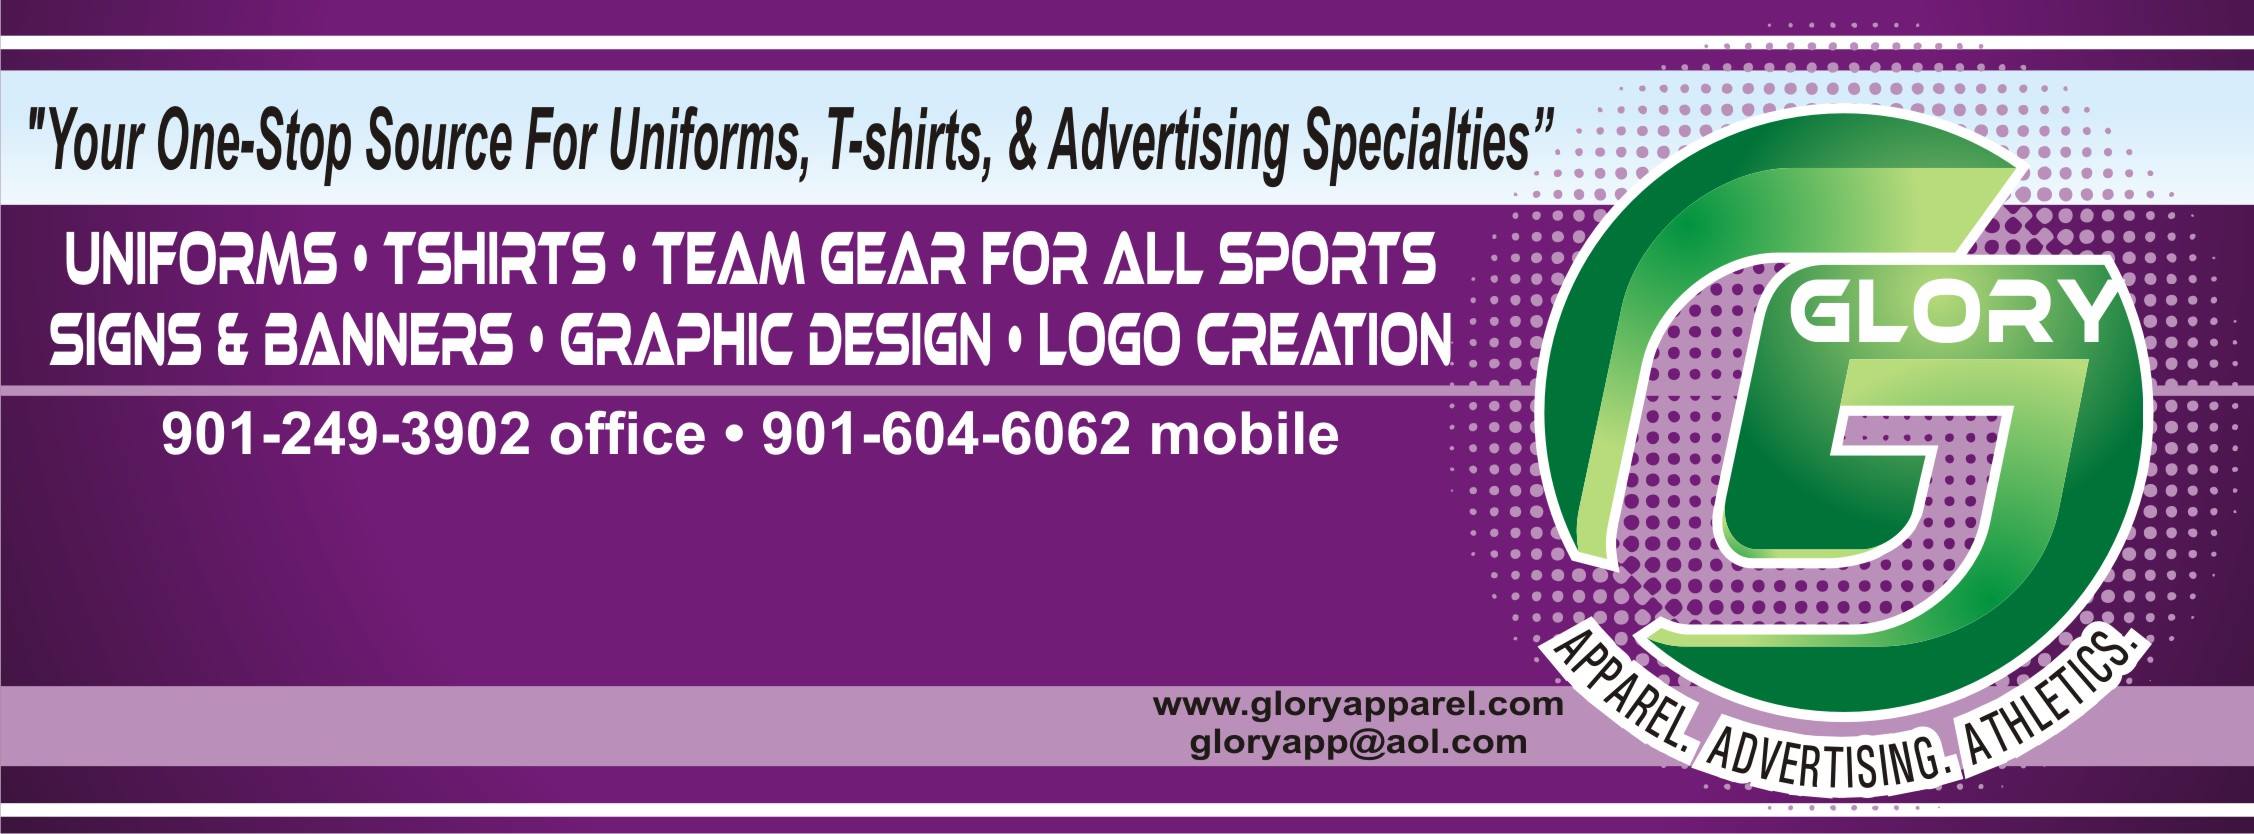 Glory Apparel and Advertising